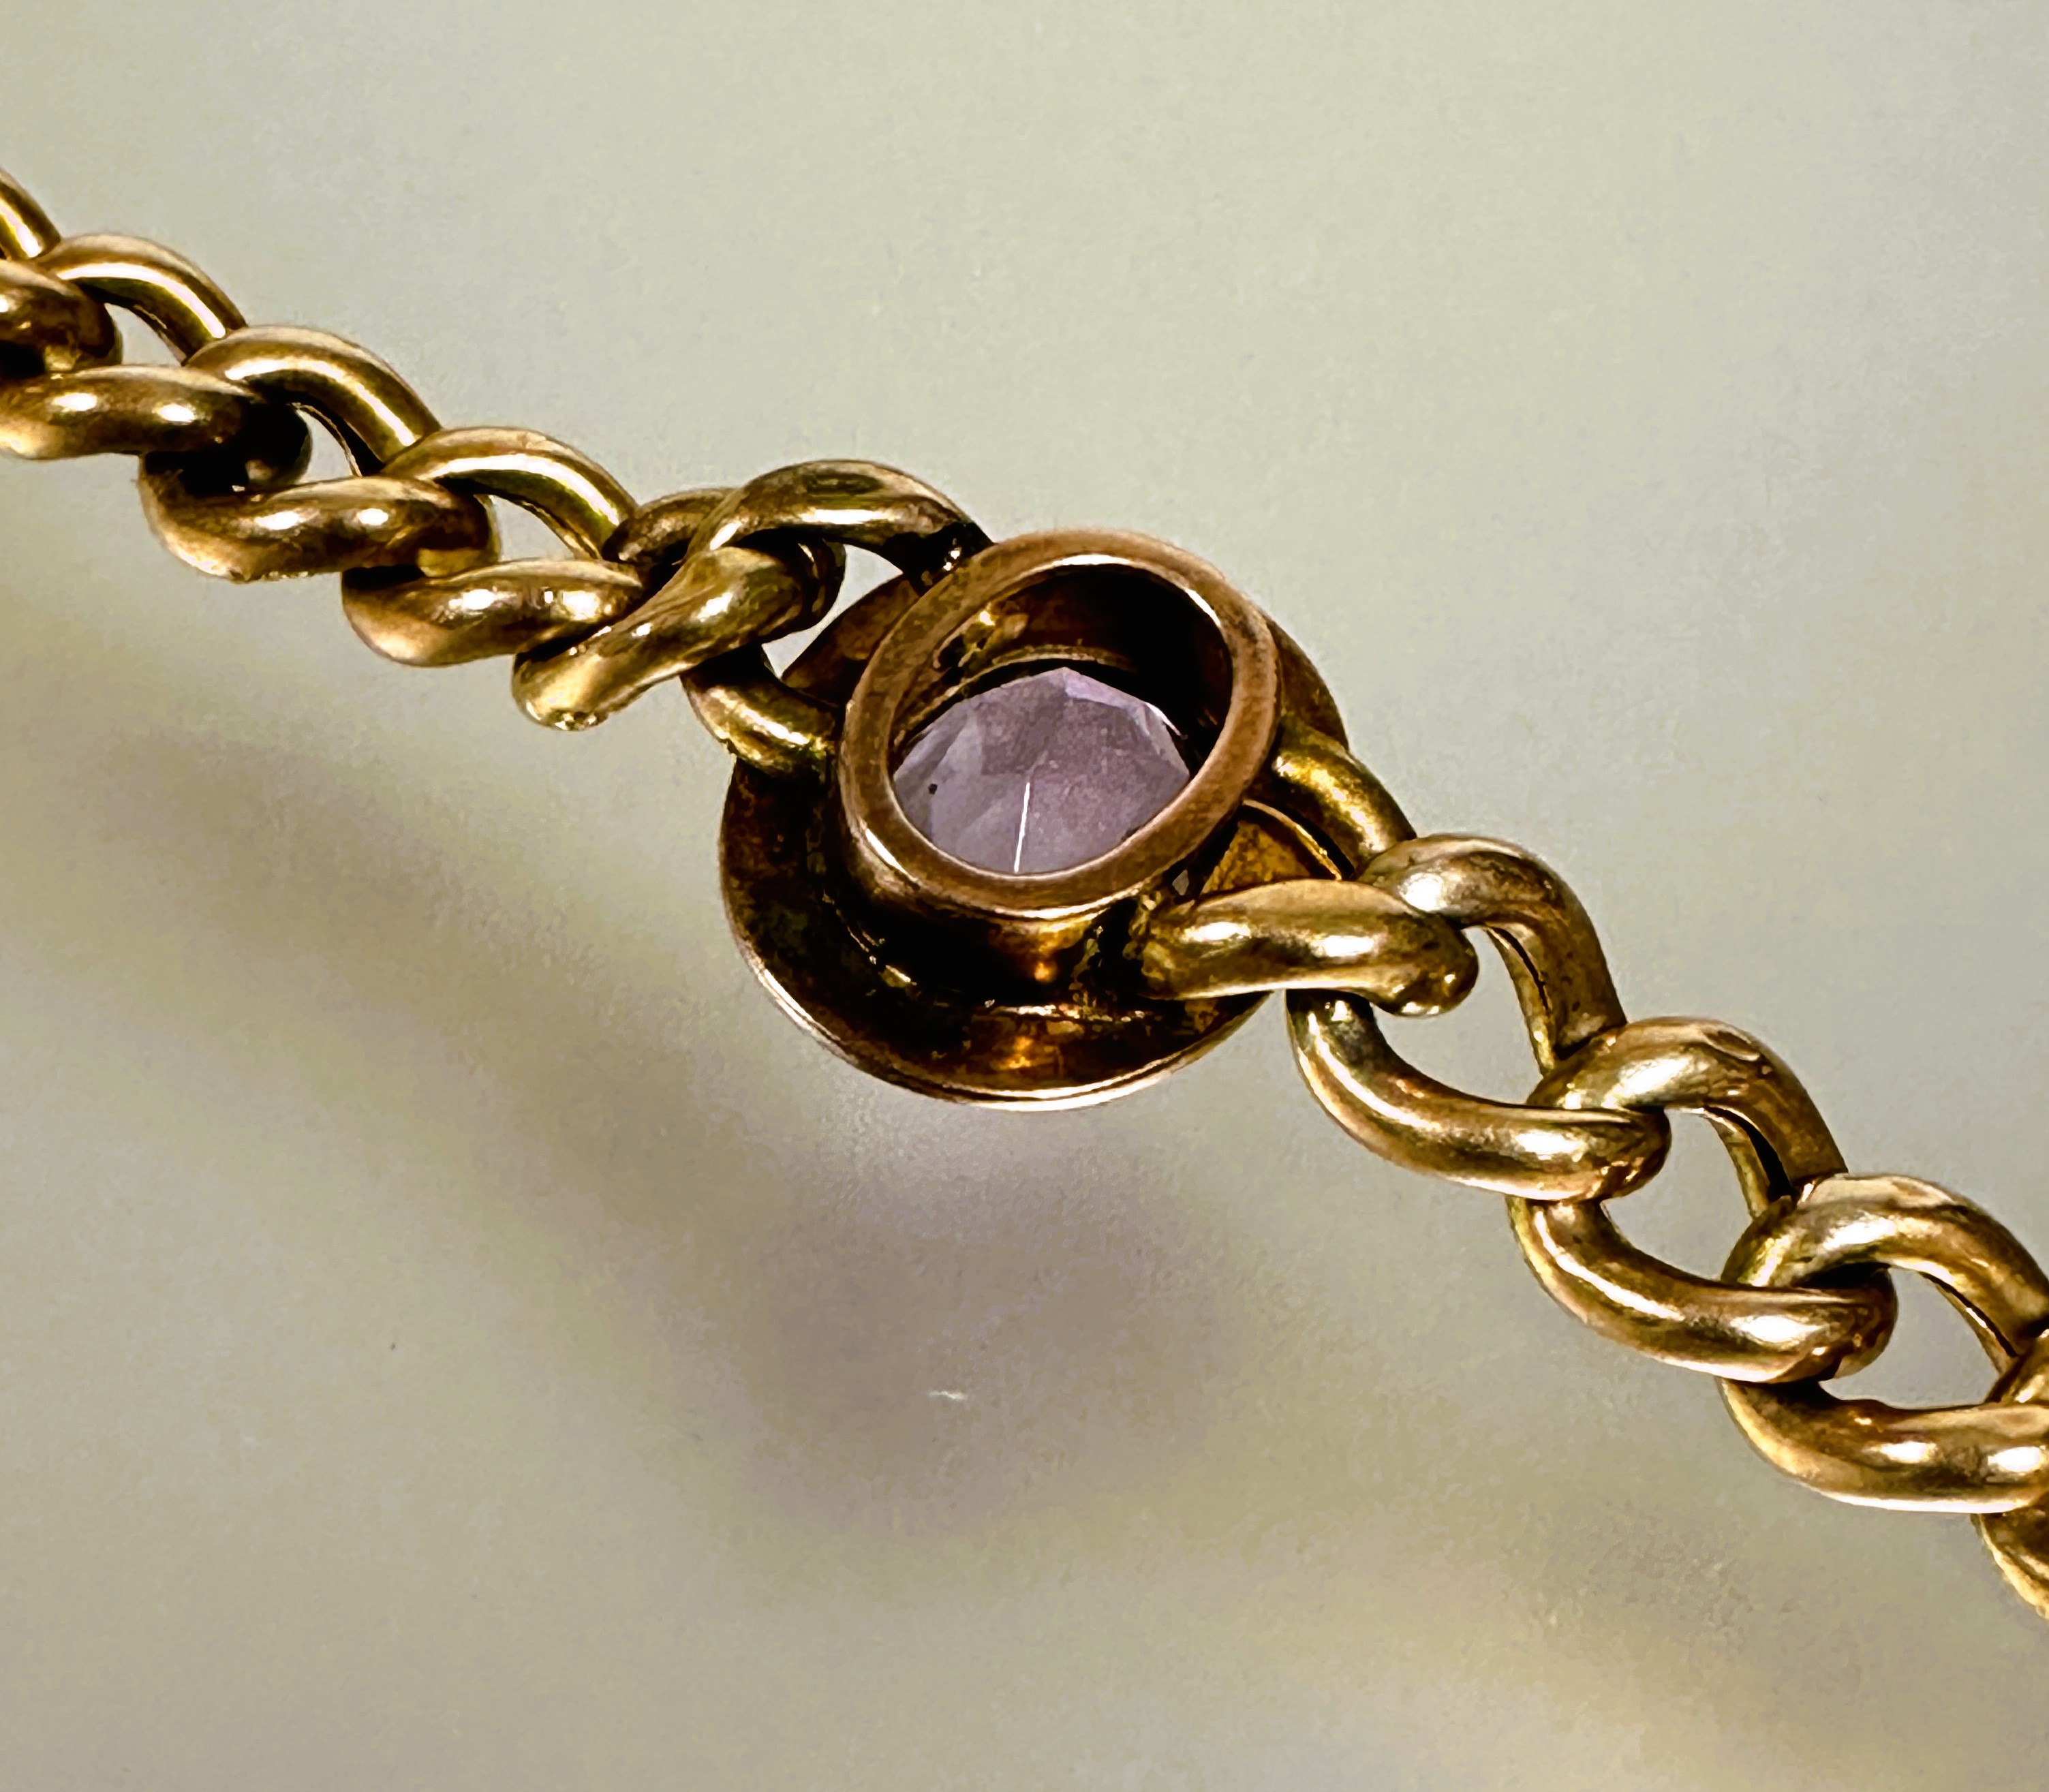 A late 19thc 9ct gold engraved kerb link chain bracelet with clasp fastening and safety chain - Image 3 of 5